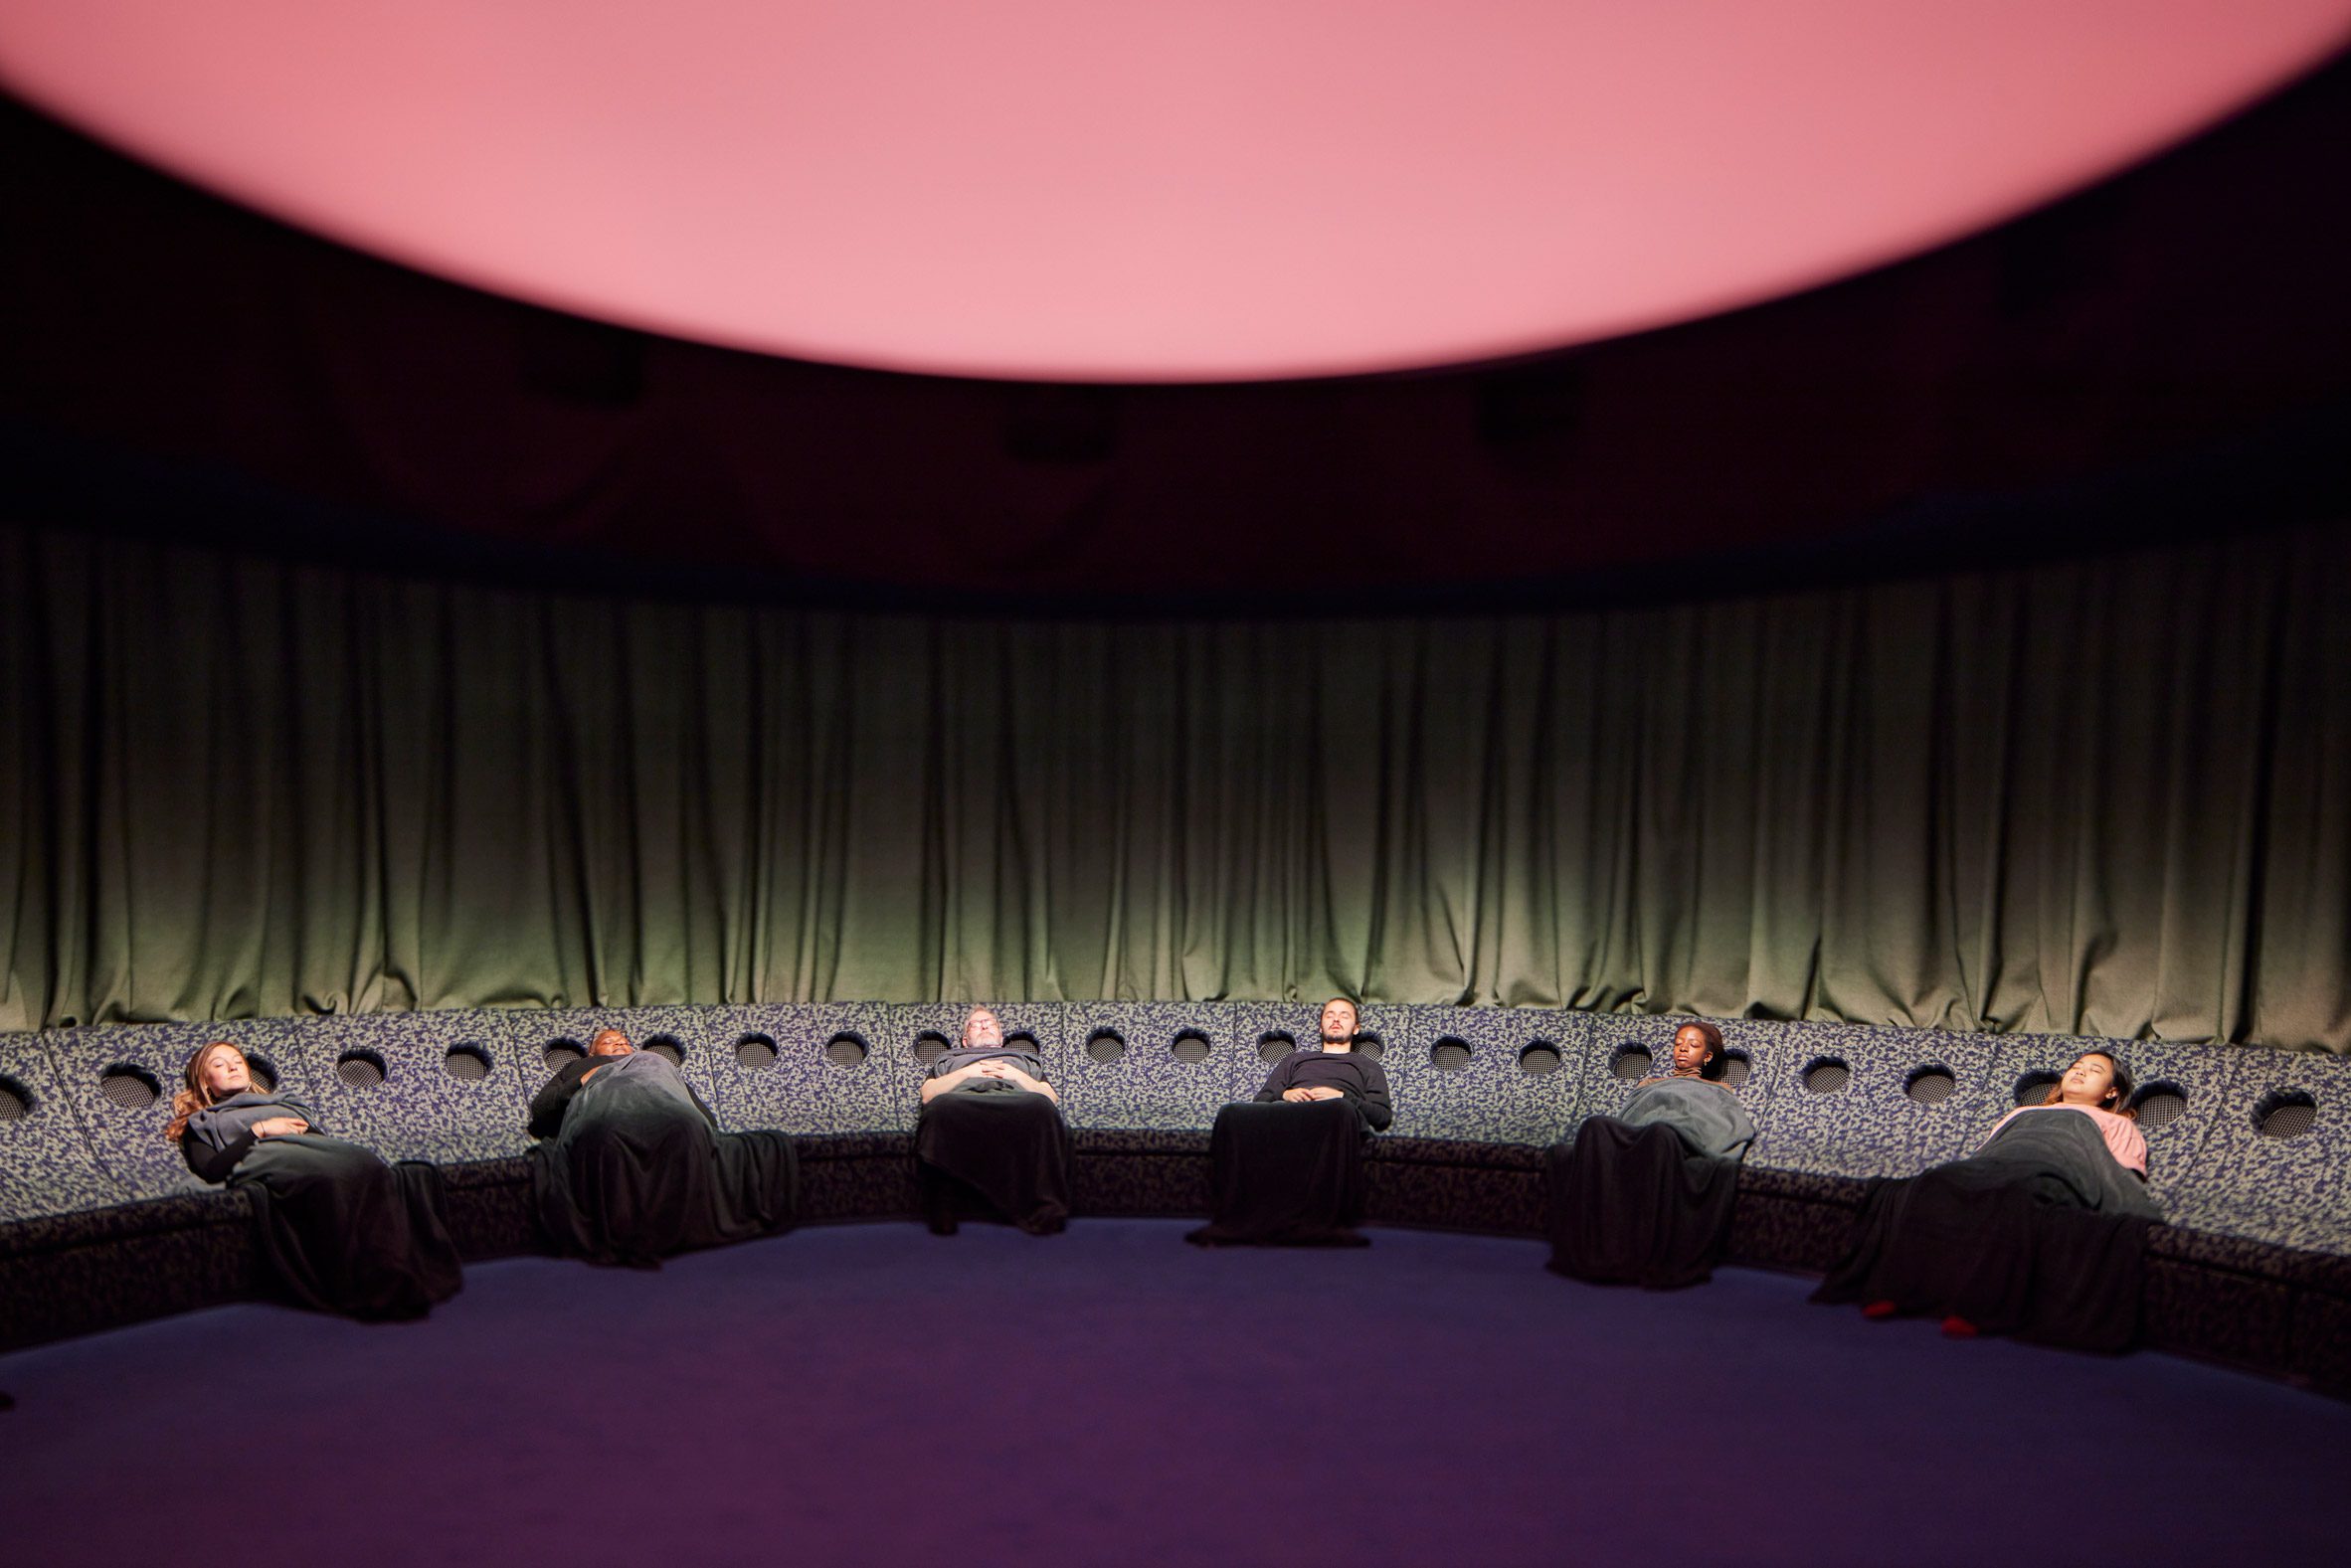 Six people laying down in a room with green curtains and a pink glowing ceiling